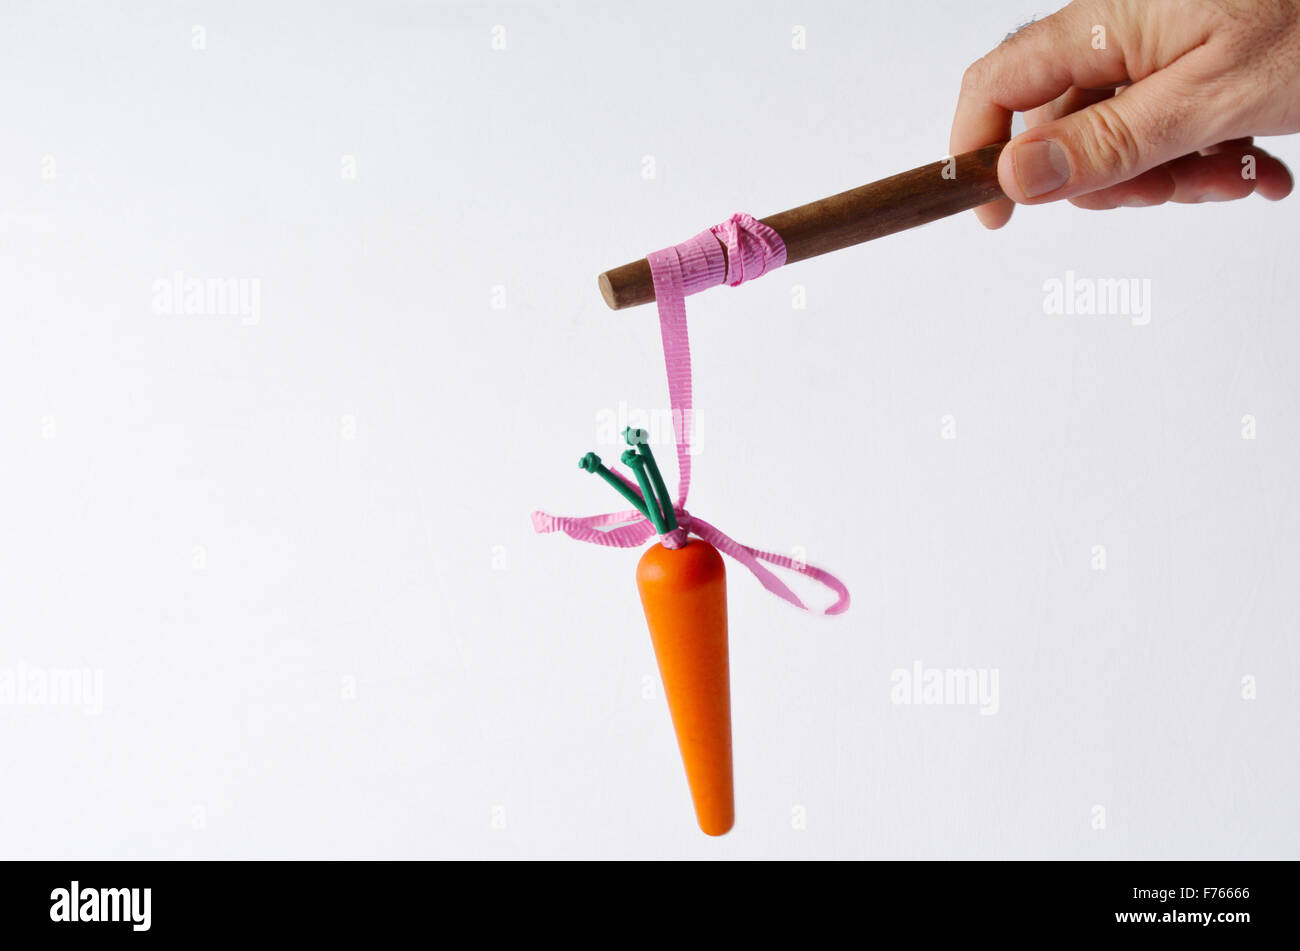 Approach carrot and stick Alberta’s carrot